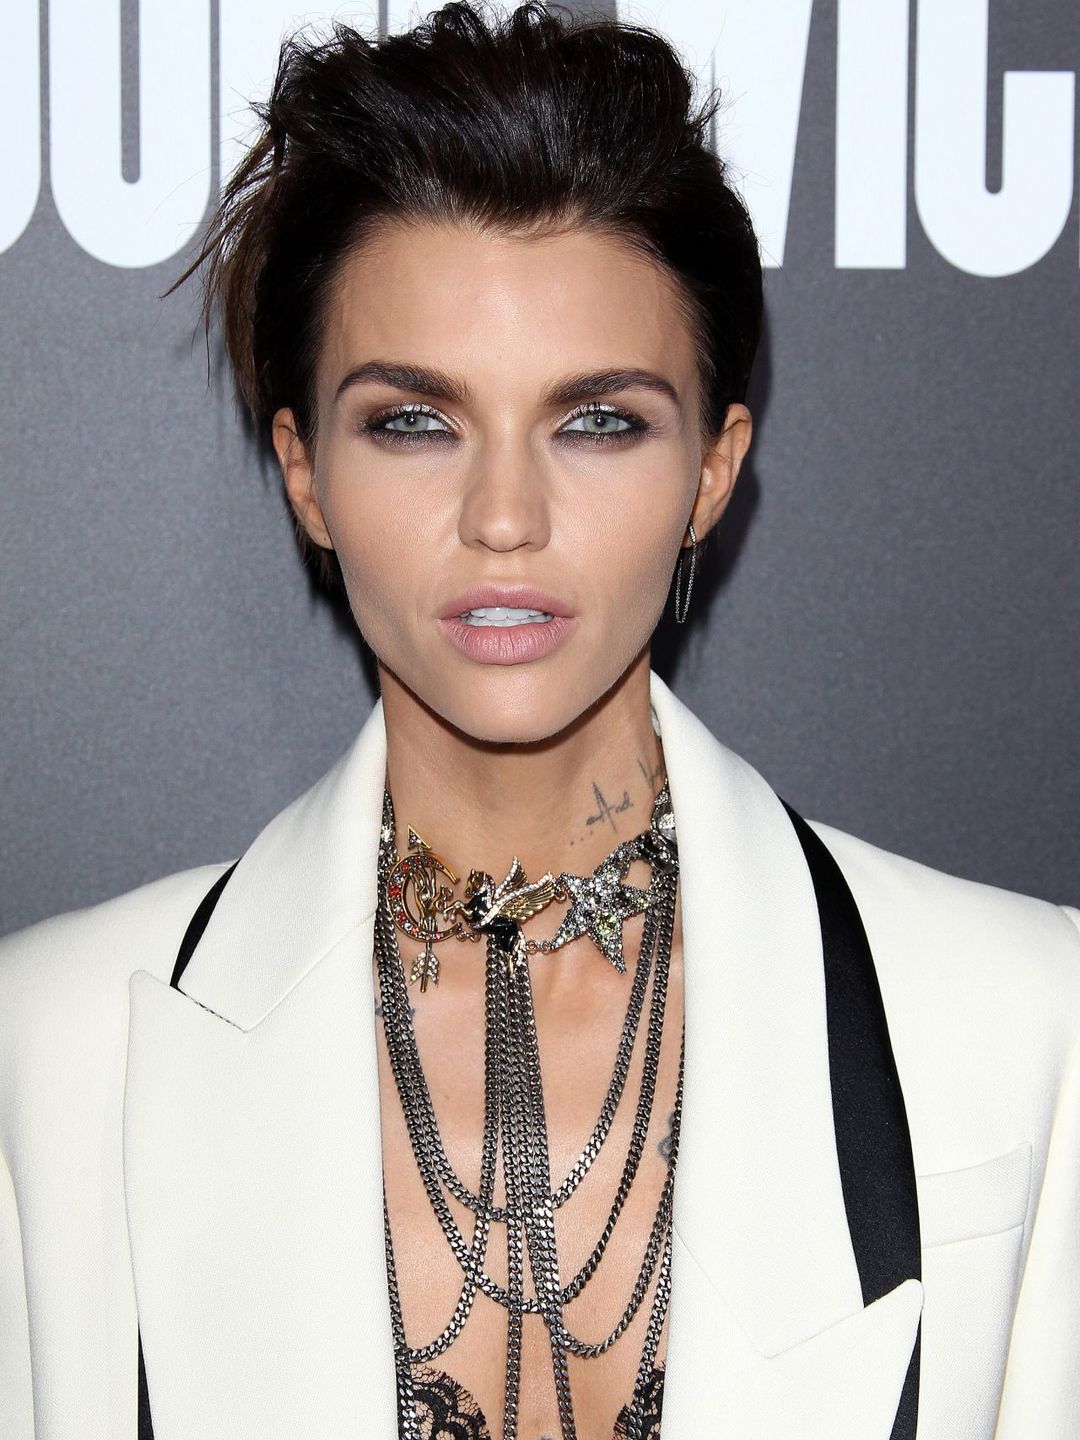 Ruby Rose age